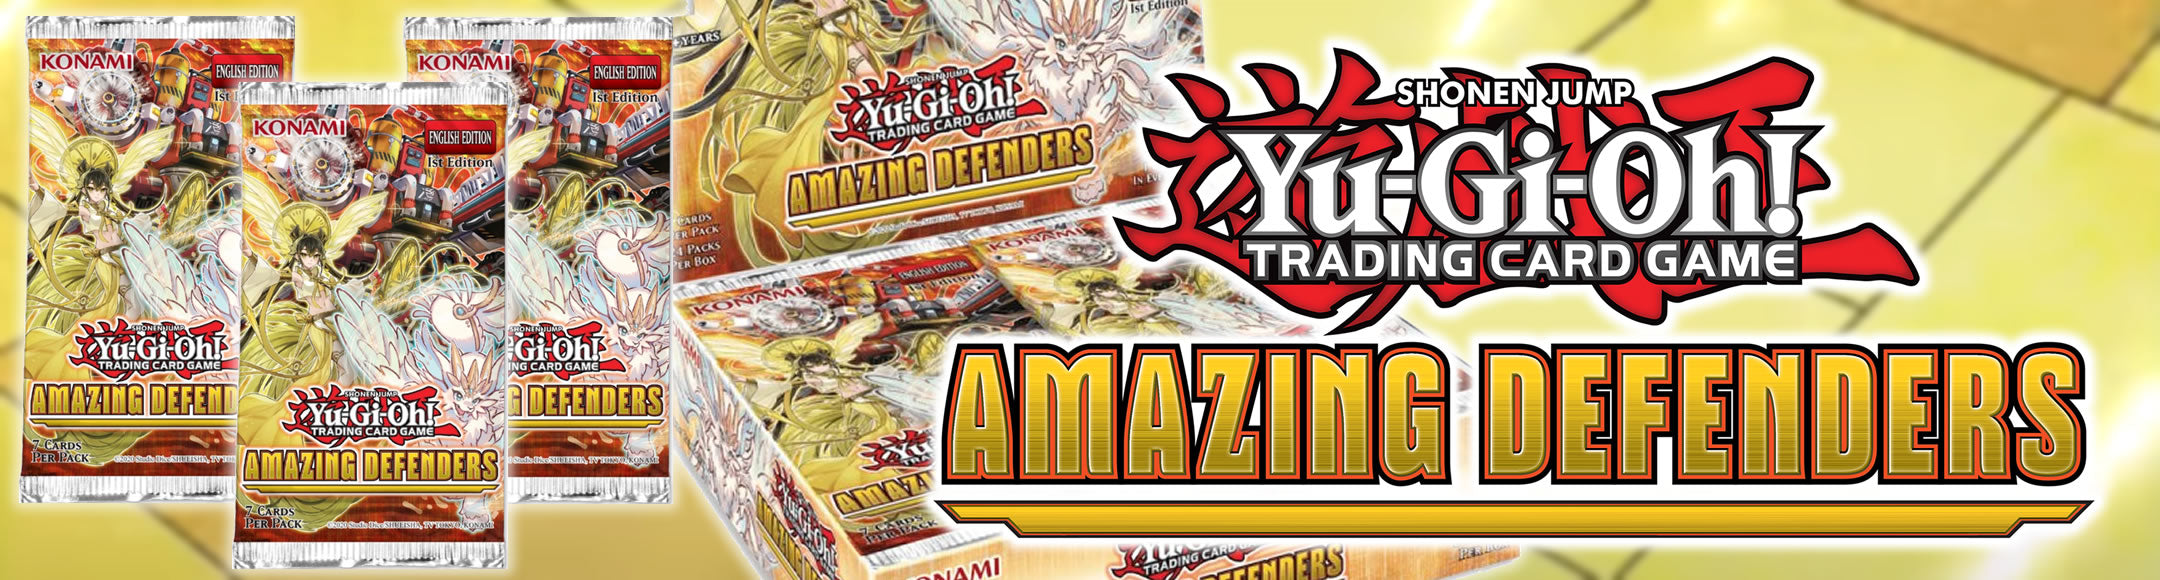 Yu-Gi-Oh! Amazing Defenders Booster Pack Single Cards